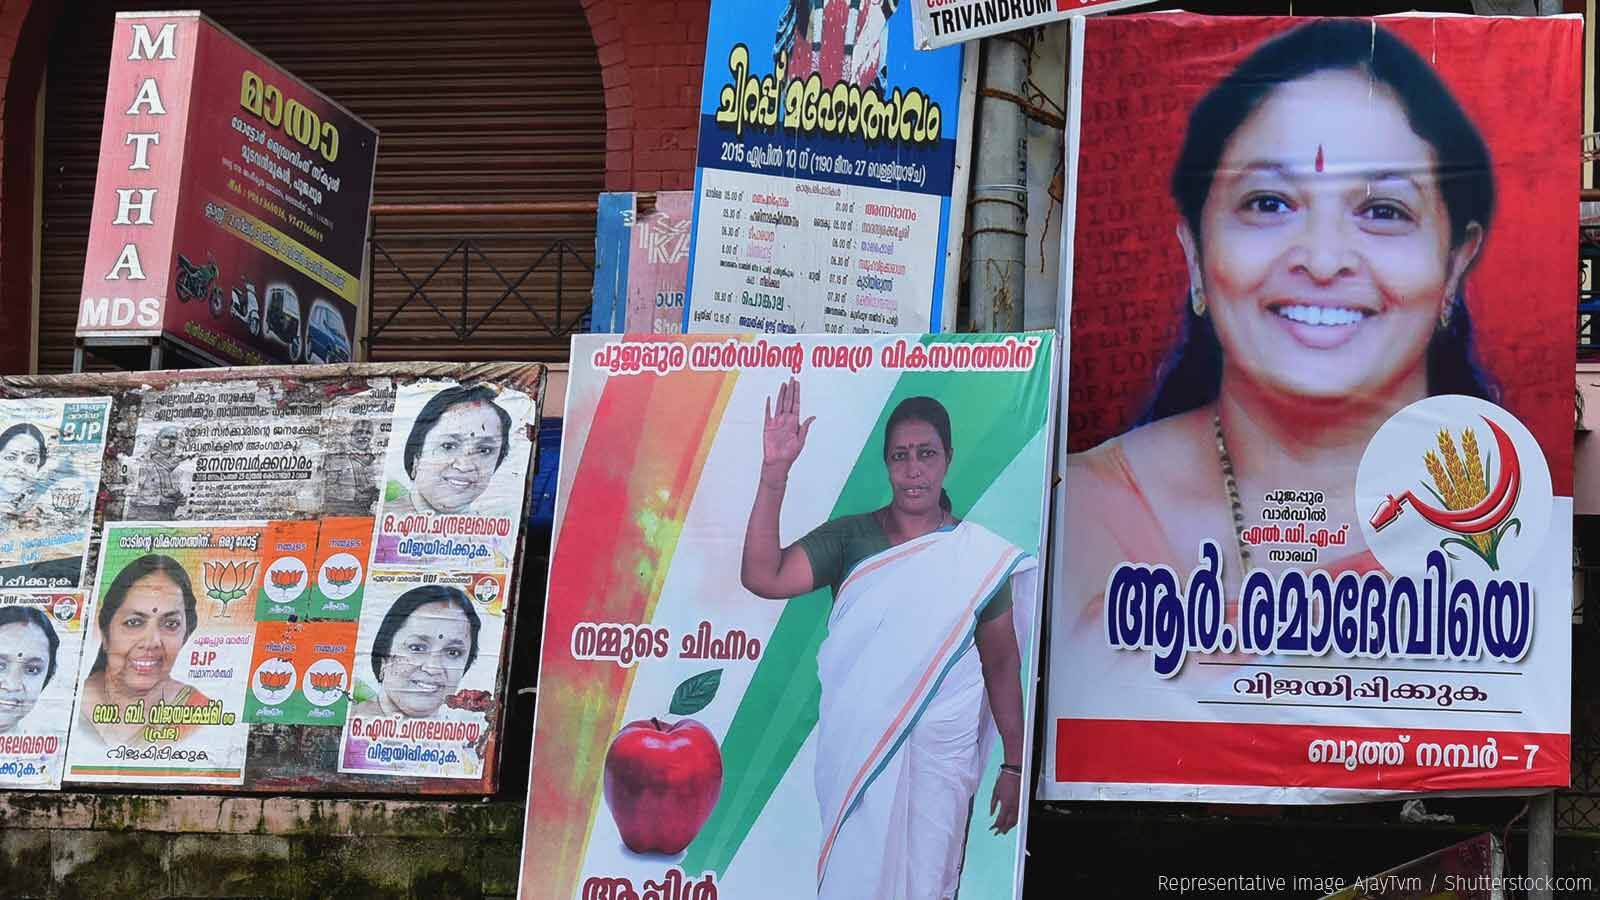 No More Than 6% Women MLAs In Kerala's Assembly In Last 20 Years